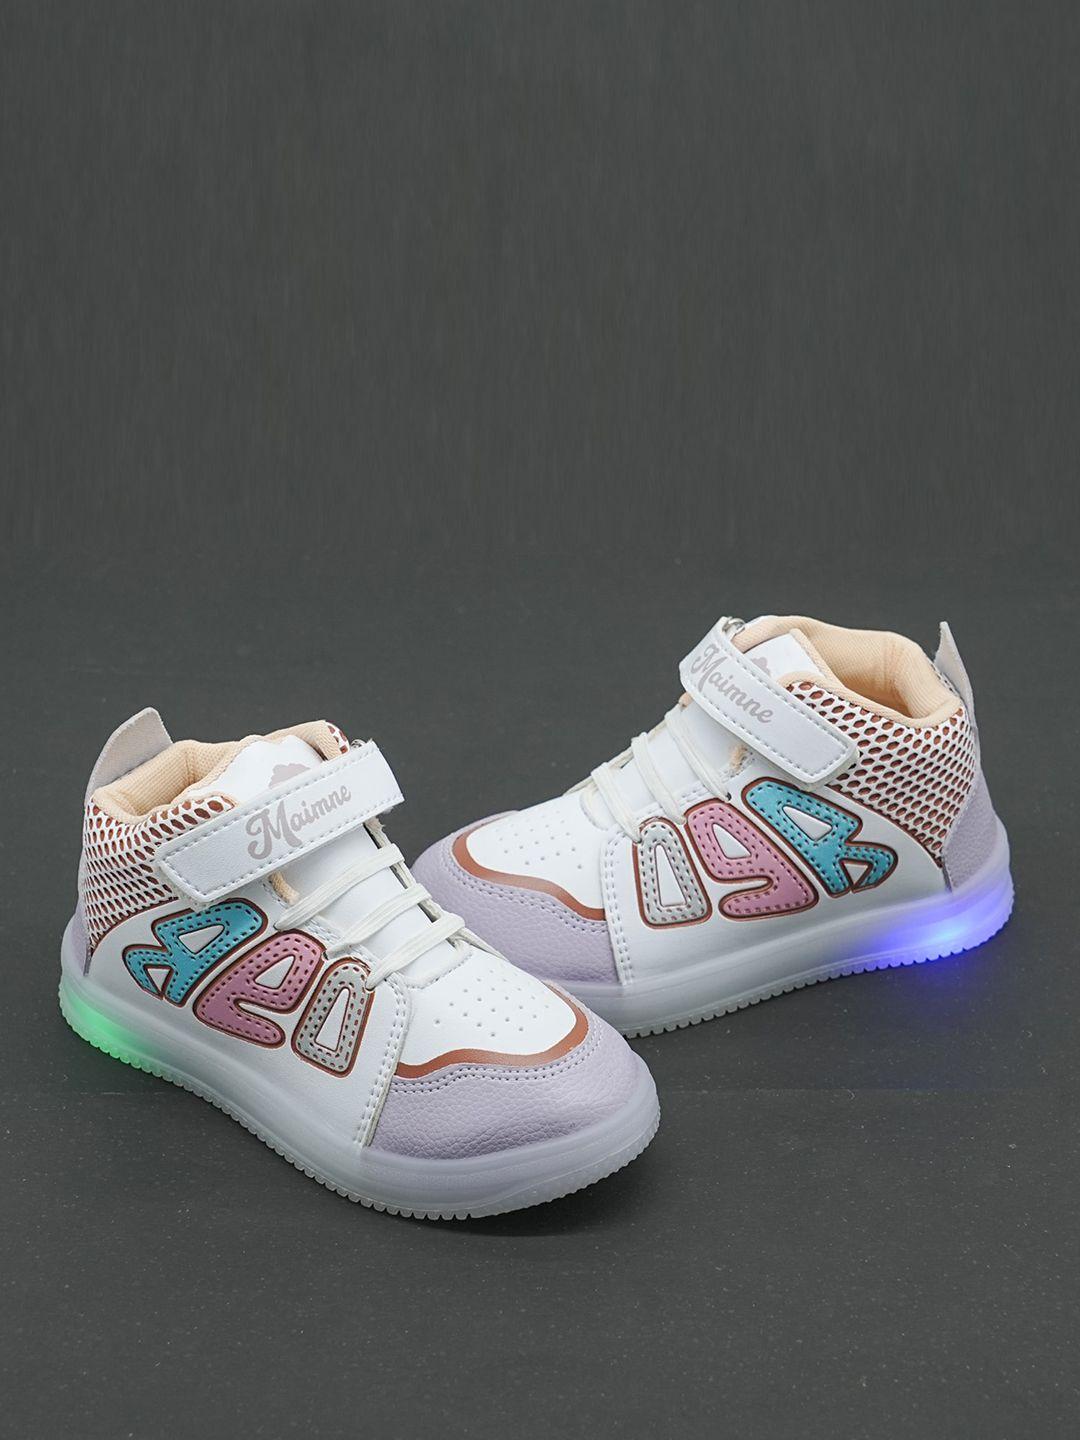 baesd kids colourblocked led lightweight mid-top sneakers